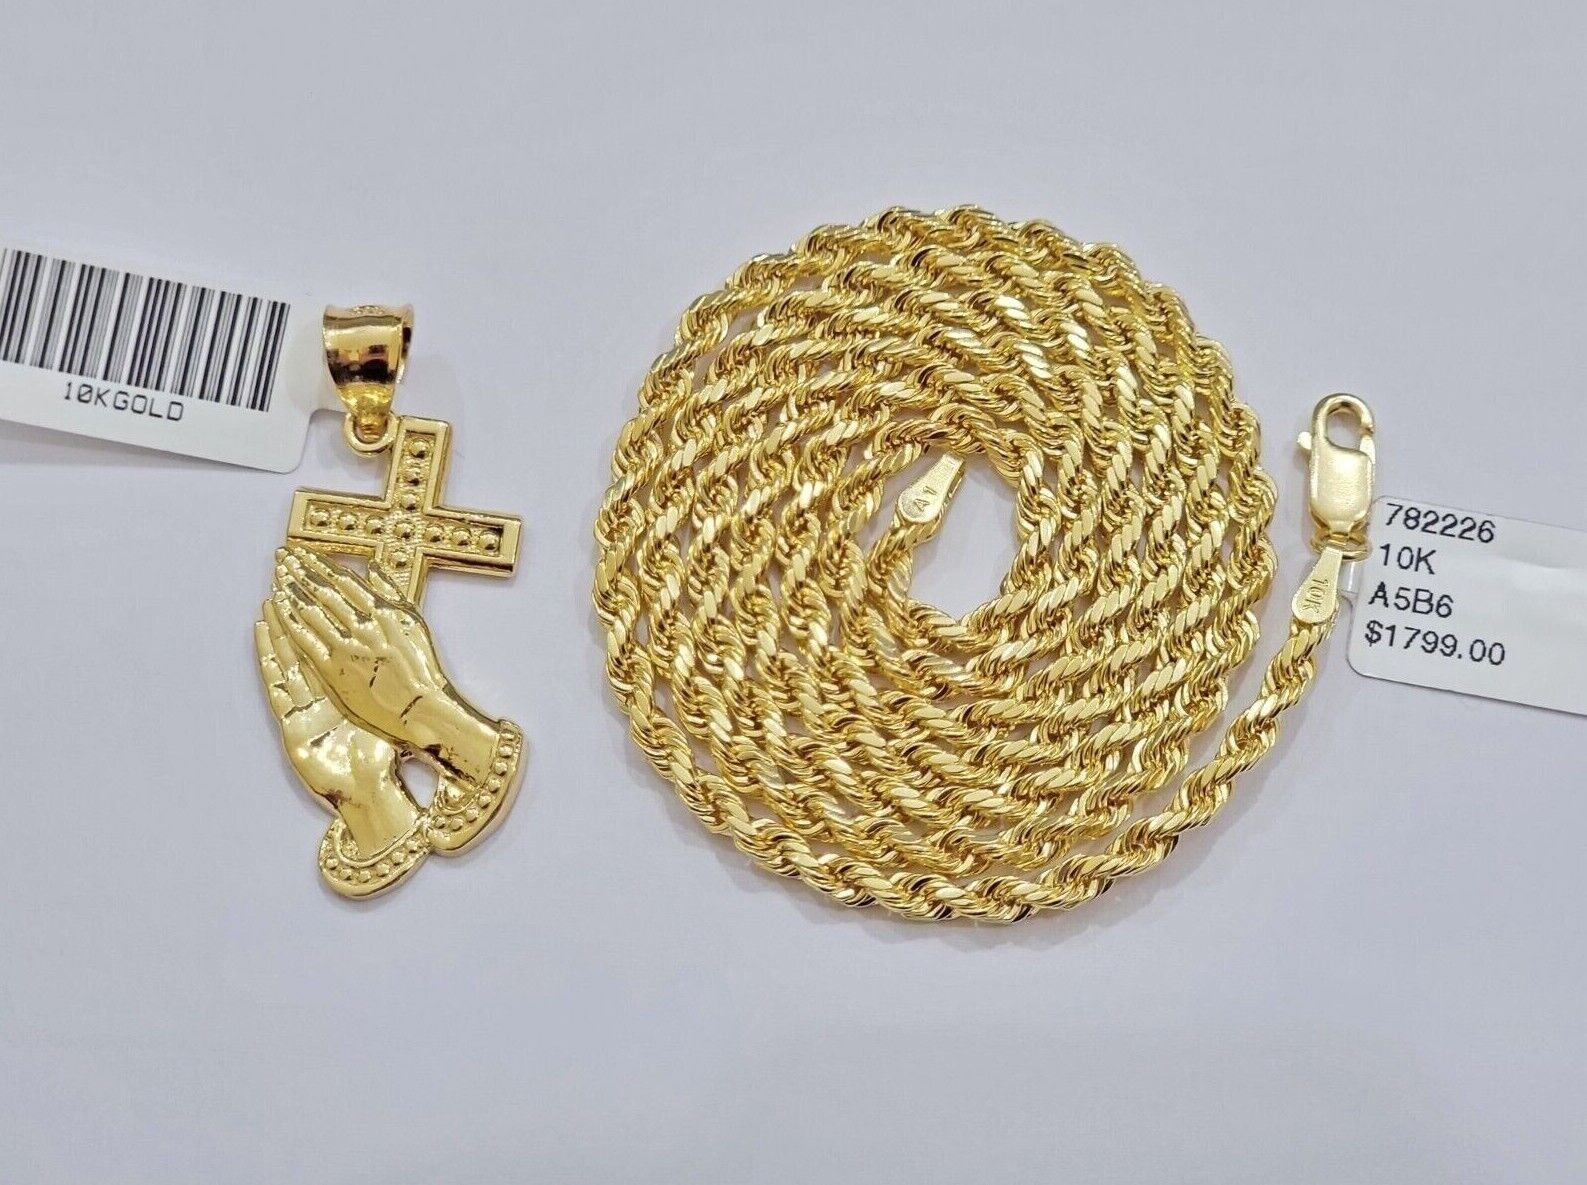 10k Gold Rope Chain Praying Hand Charm Pendant Set 22'' Inches 3mm Necklace REAL